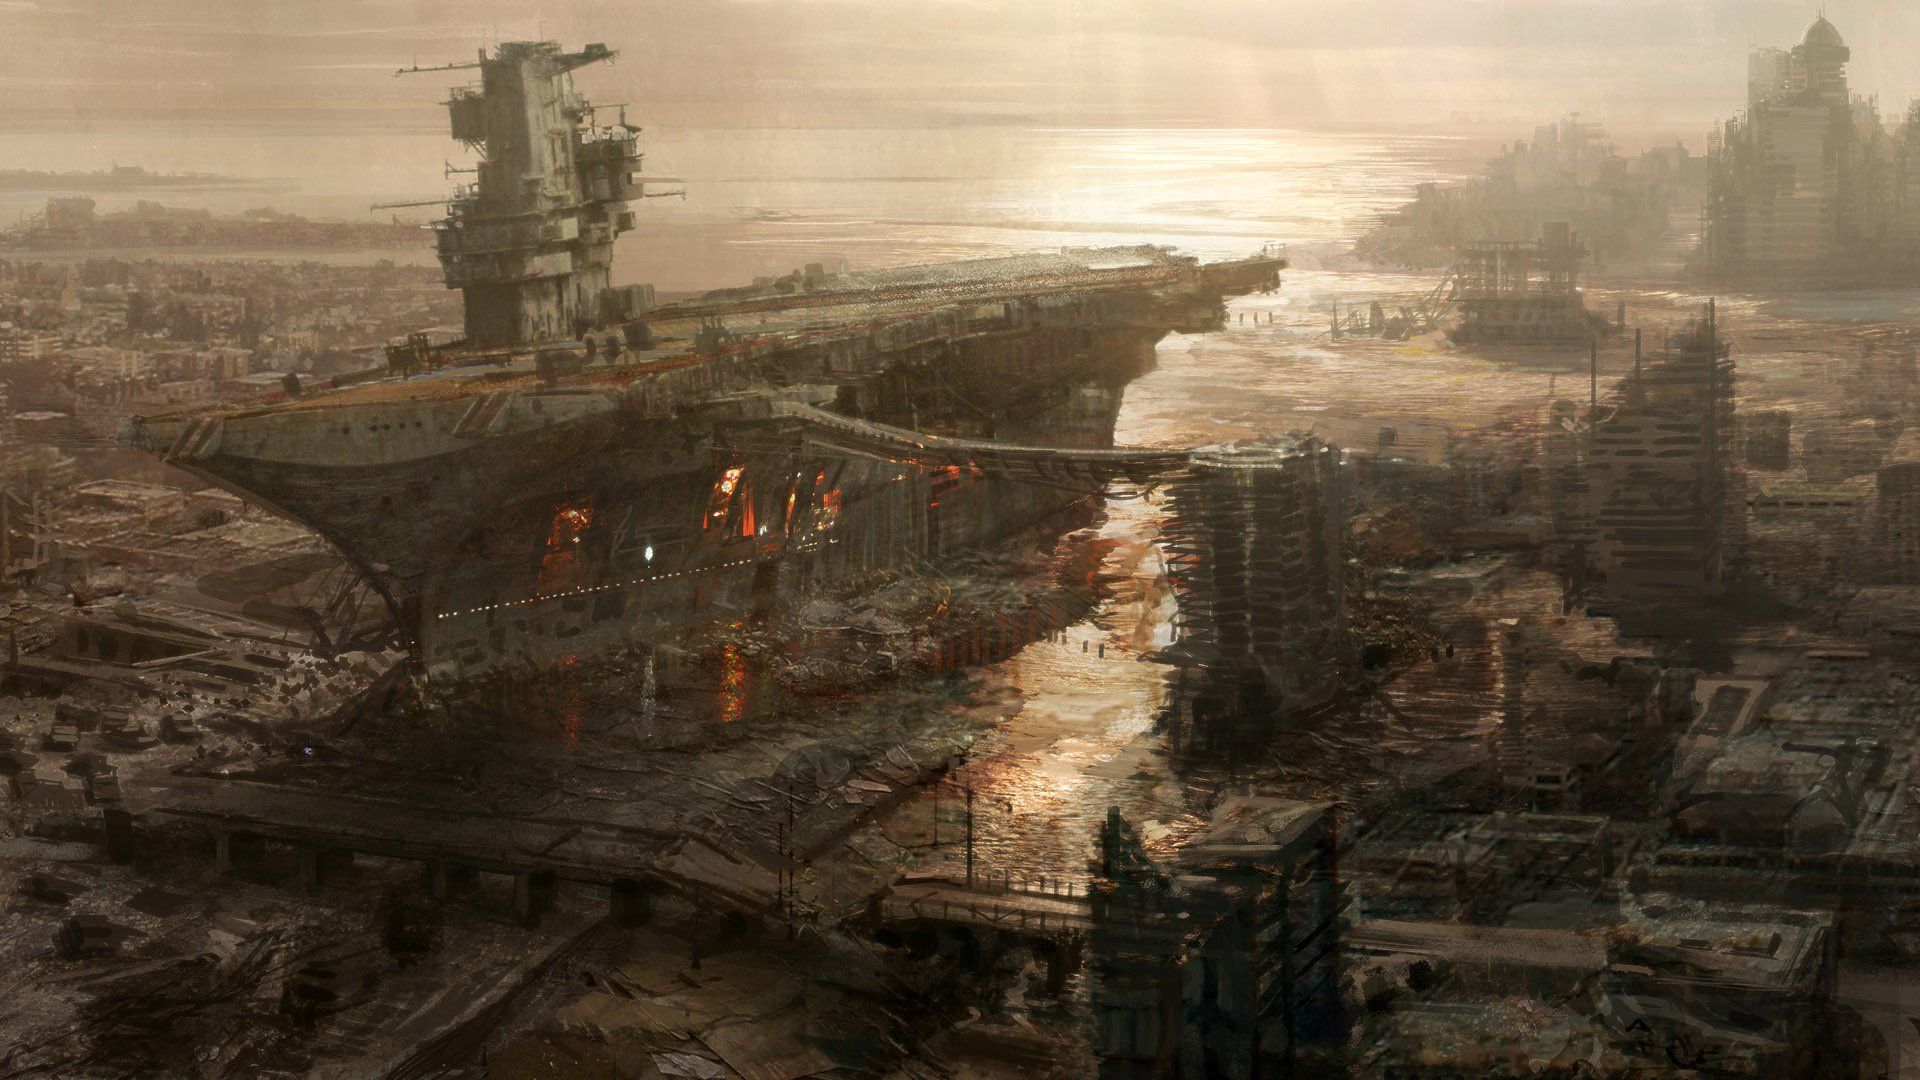 My Dystopian, and apocalyptic wallpaper